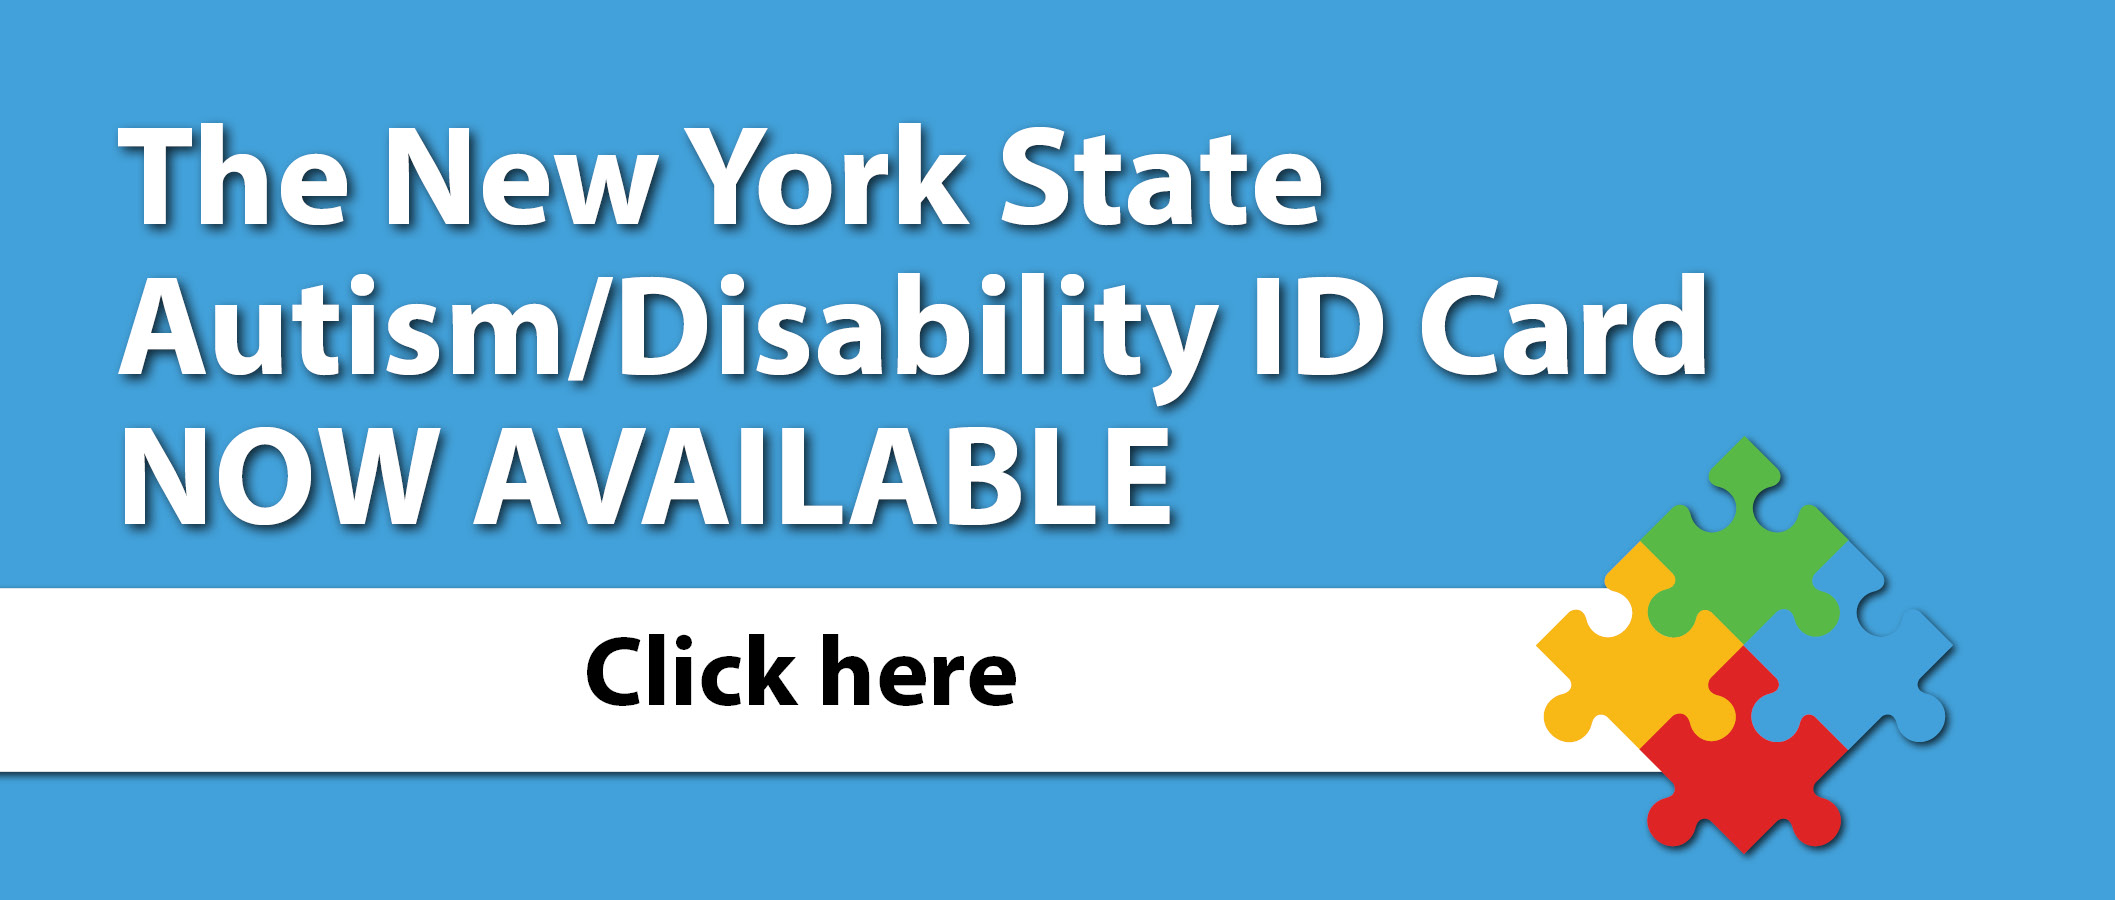 NYS Autism/Disability Card